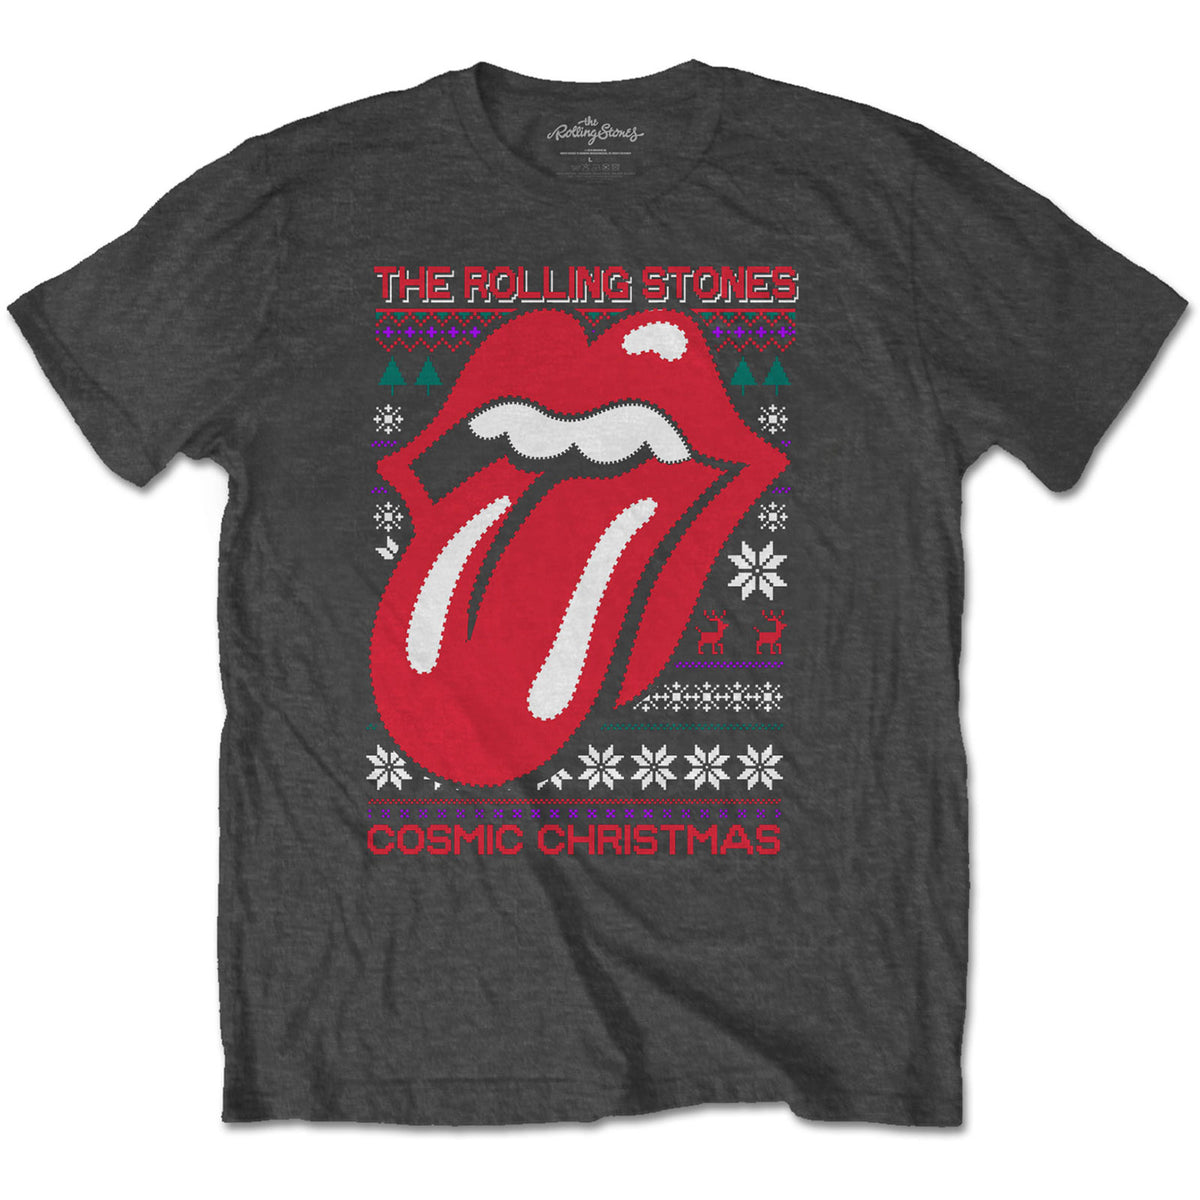 The Rolling Stones Weihnachts-T-Shirt – Cosmic Christmas – Unisex, offizielles Lizenzdesign